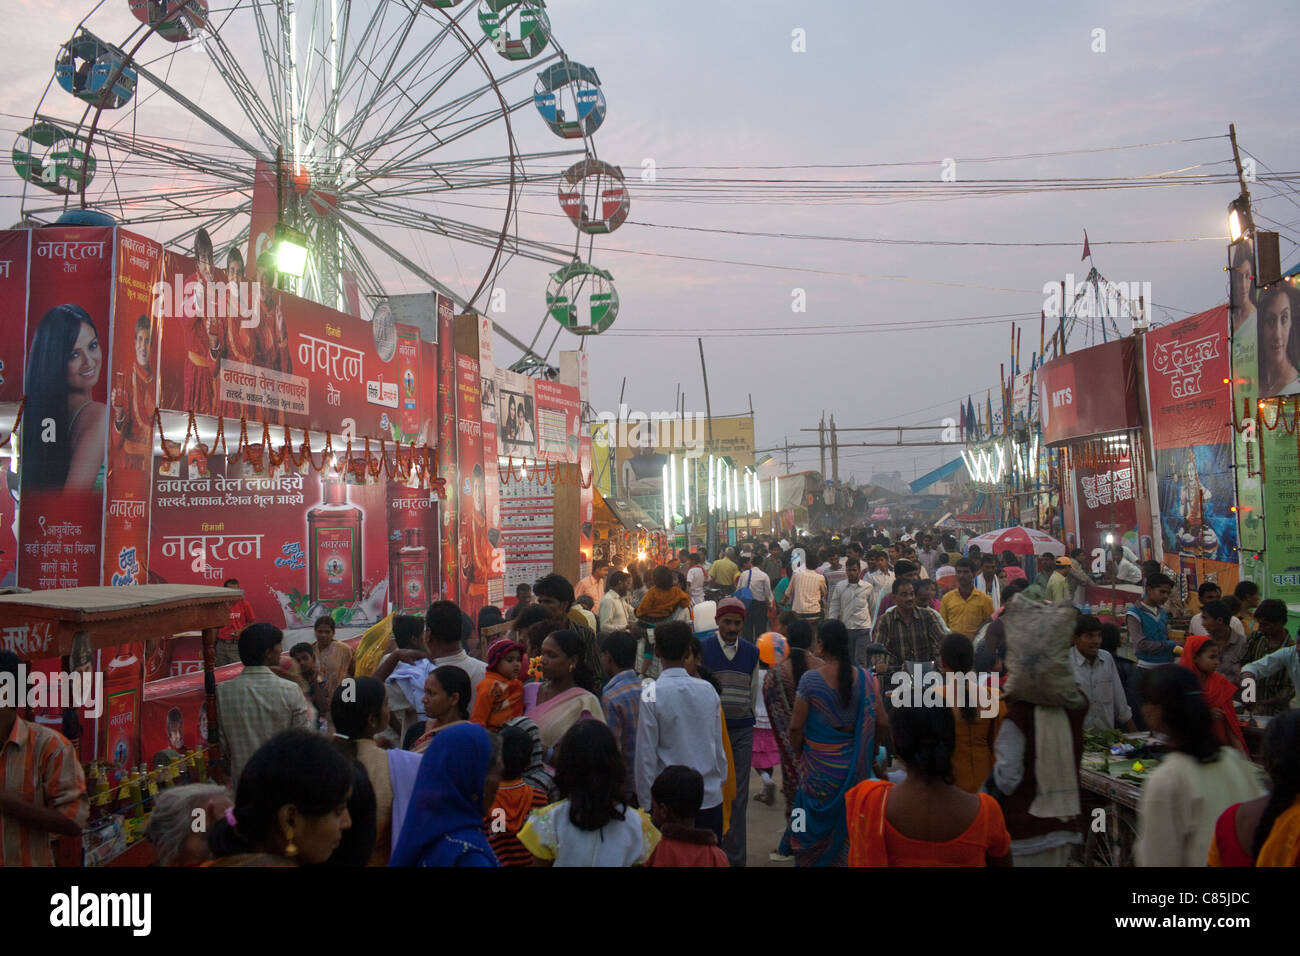 A crowded late evening at Sonepur Mela, Bihar state, India. 2010 Stock Photo